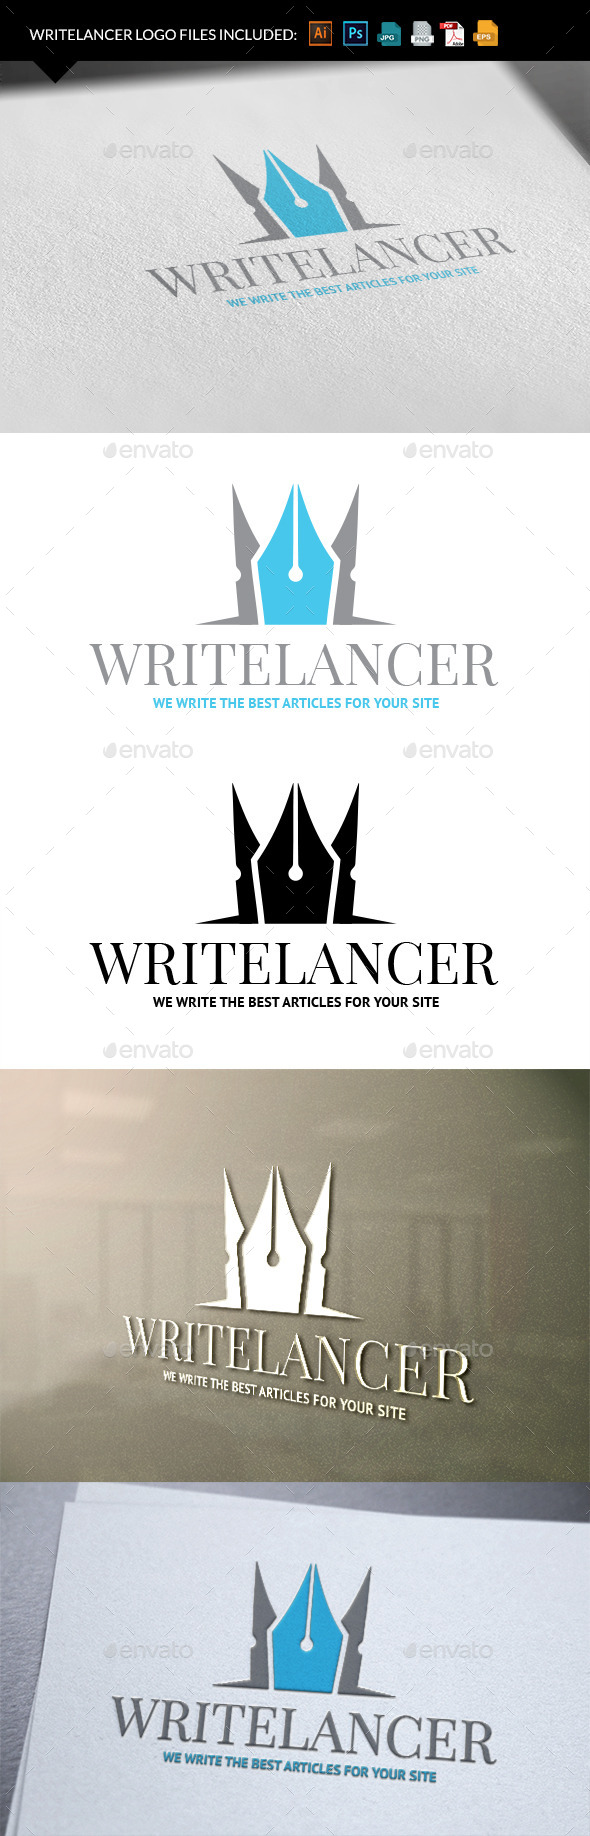 Book Publisher logo template